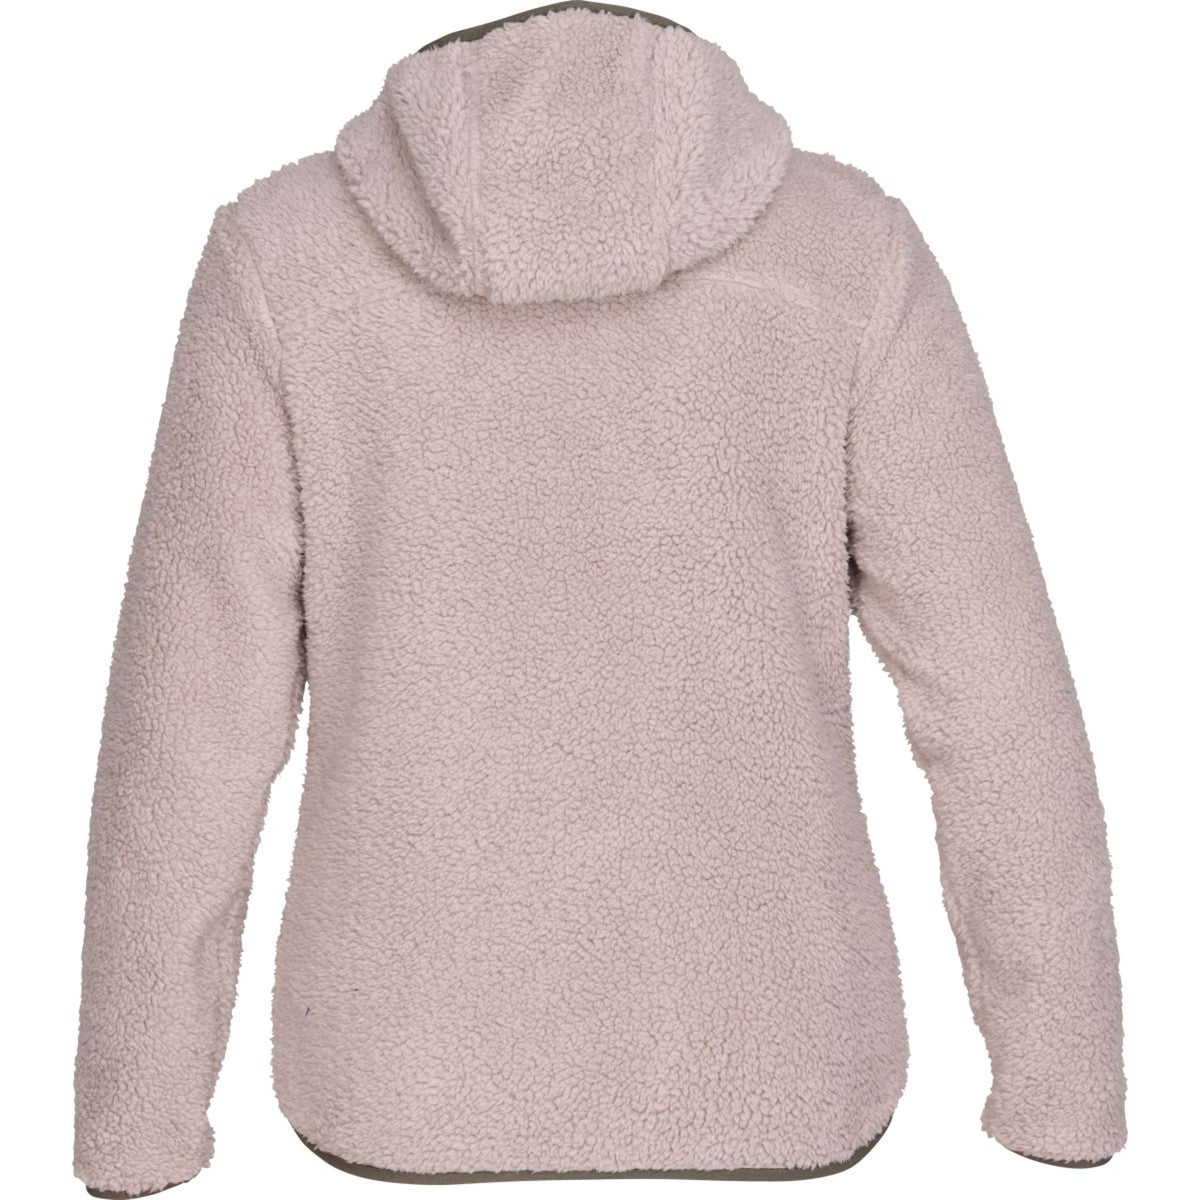 Aubrion by Shires Jack Clement Fleece Taupe